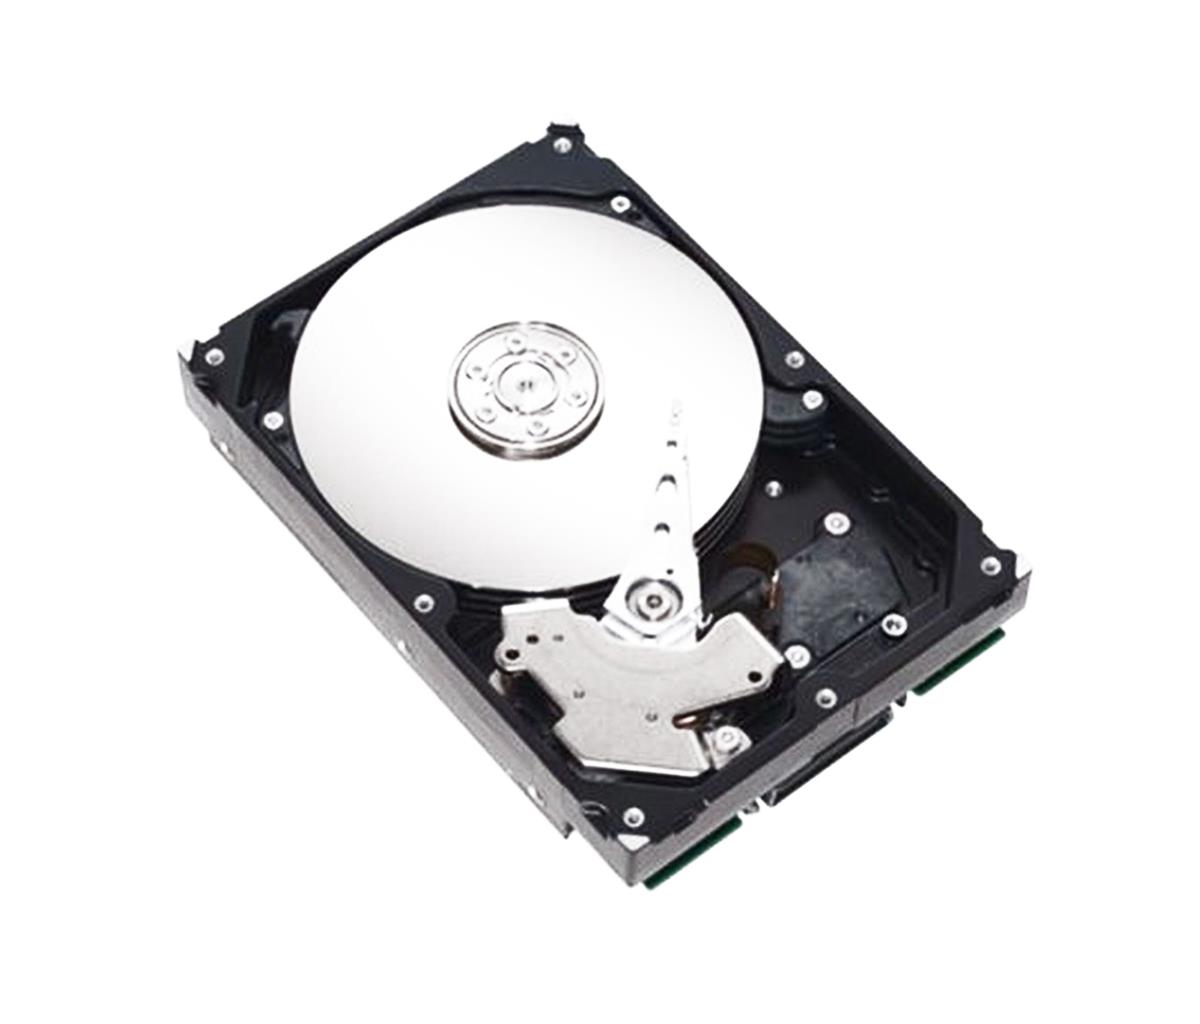 9Y8204-039 Seagate NL35 Series 500GB 7200RPM Fibre Channel 2Gbps 8MB Cache 3.5-inch Internal Hard Drive